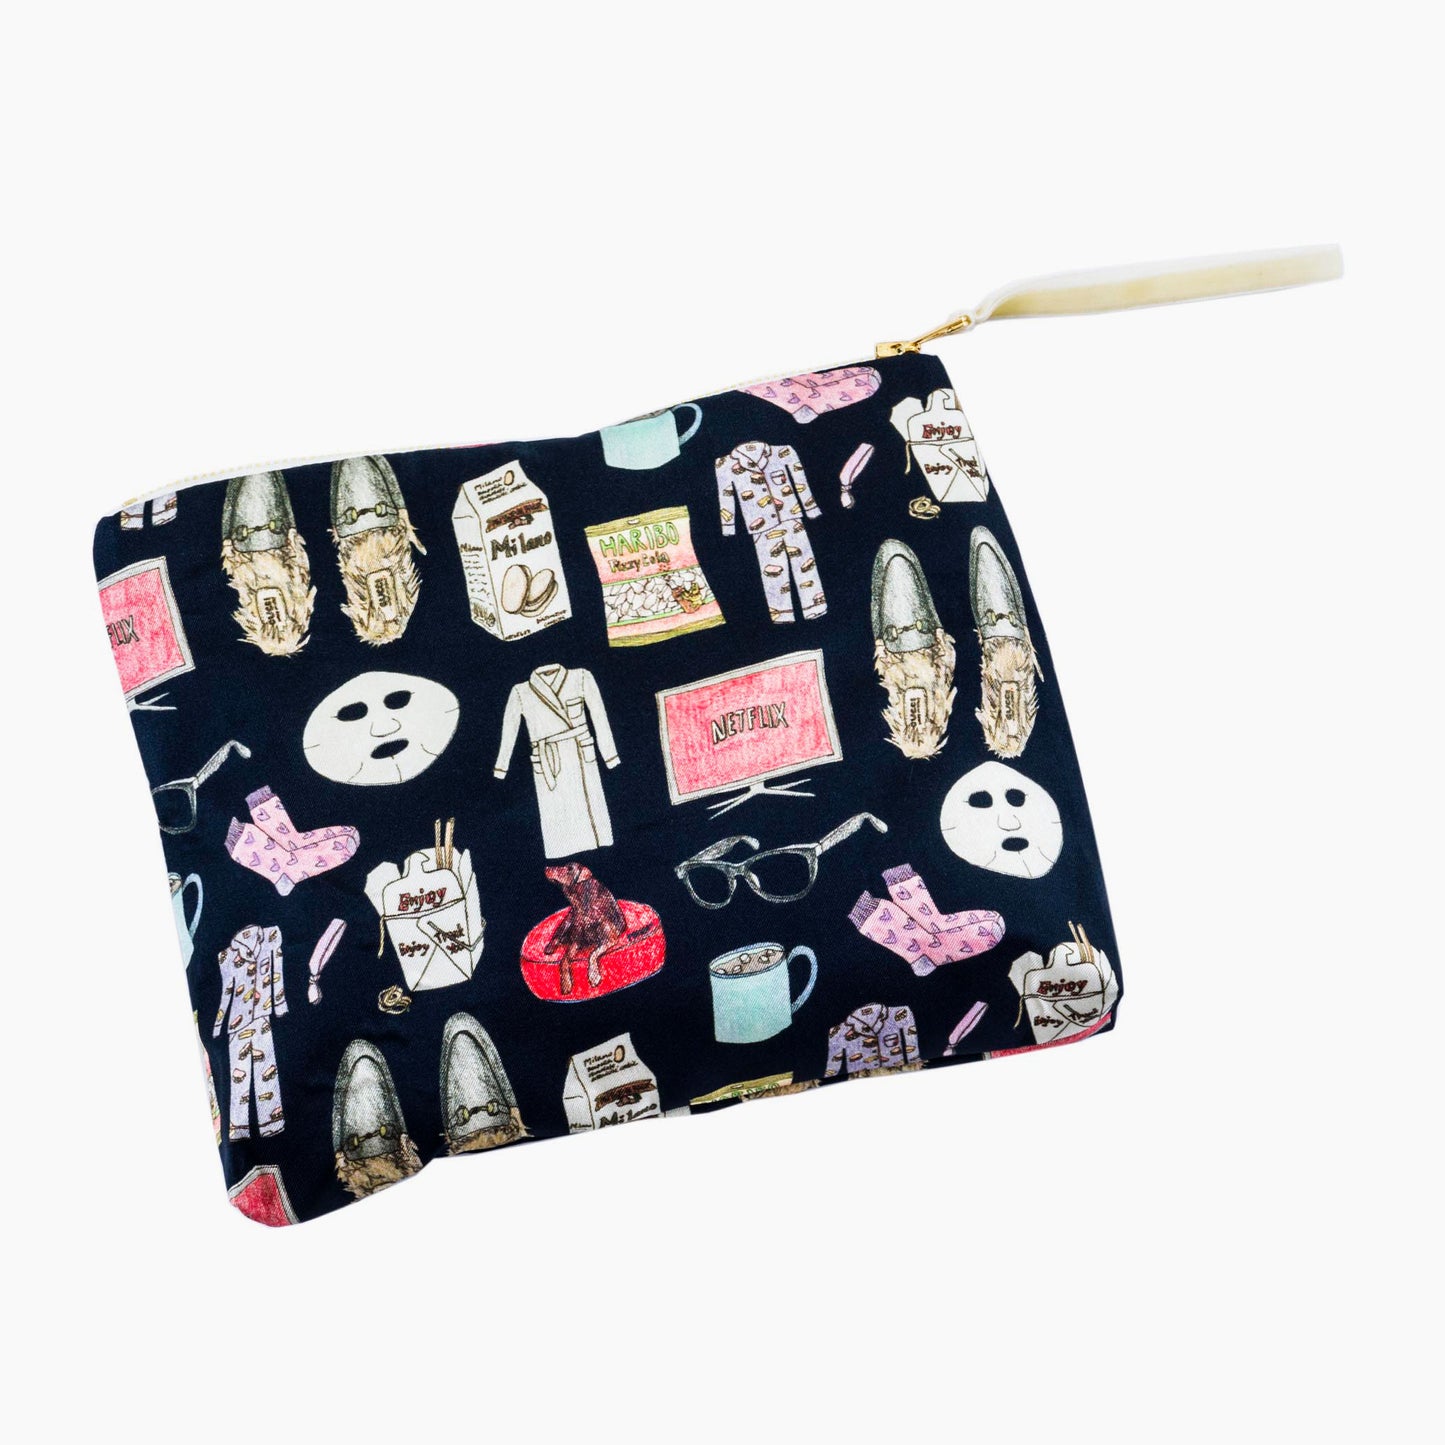 Netflix & Chill 3.0 Pouch Giant